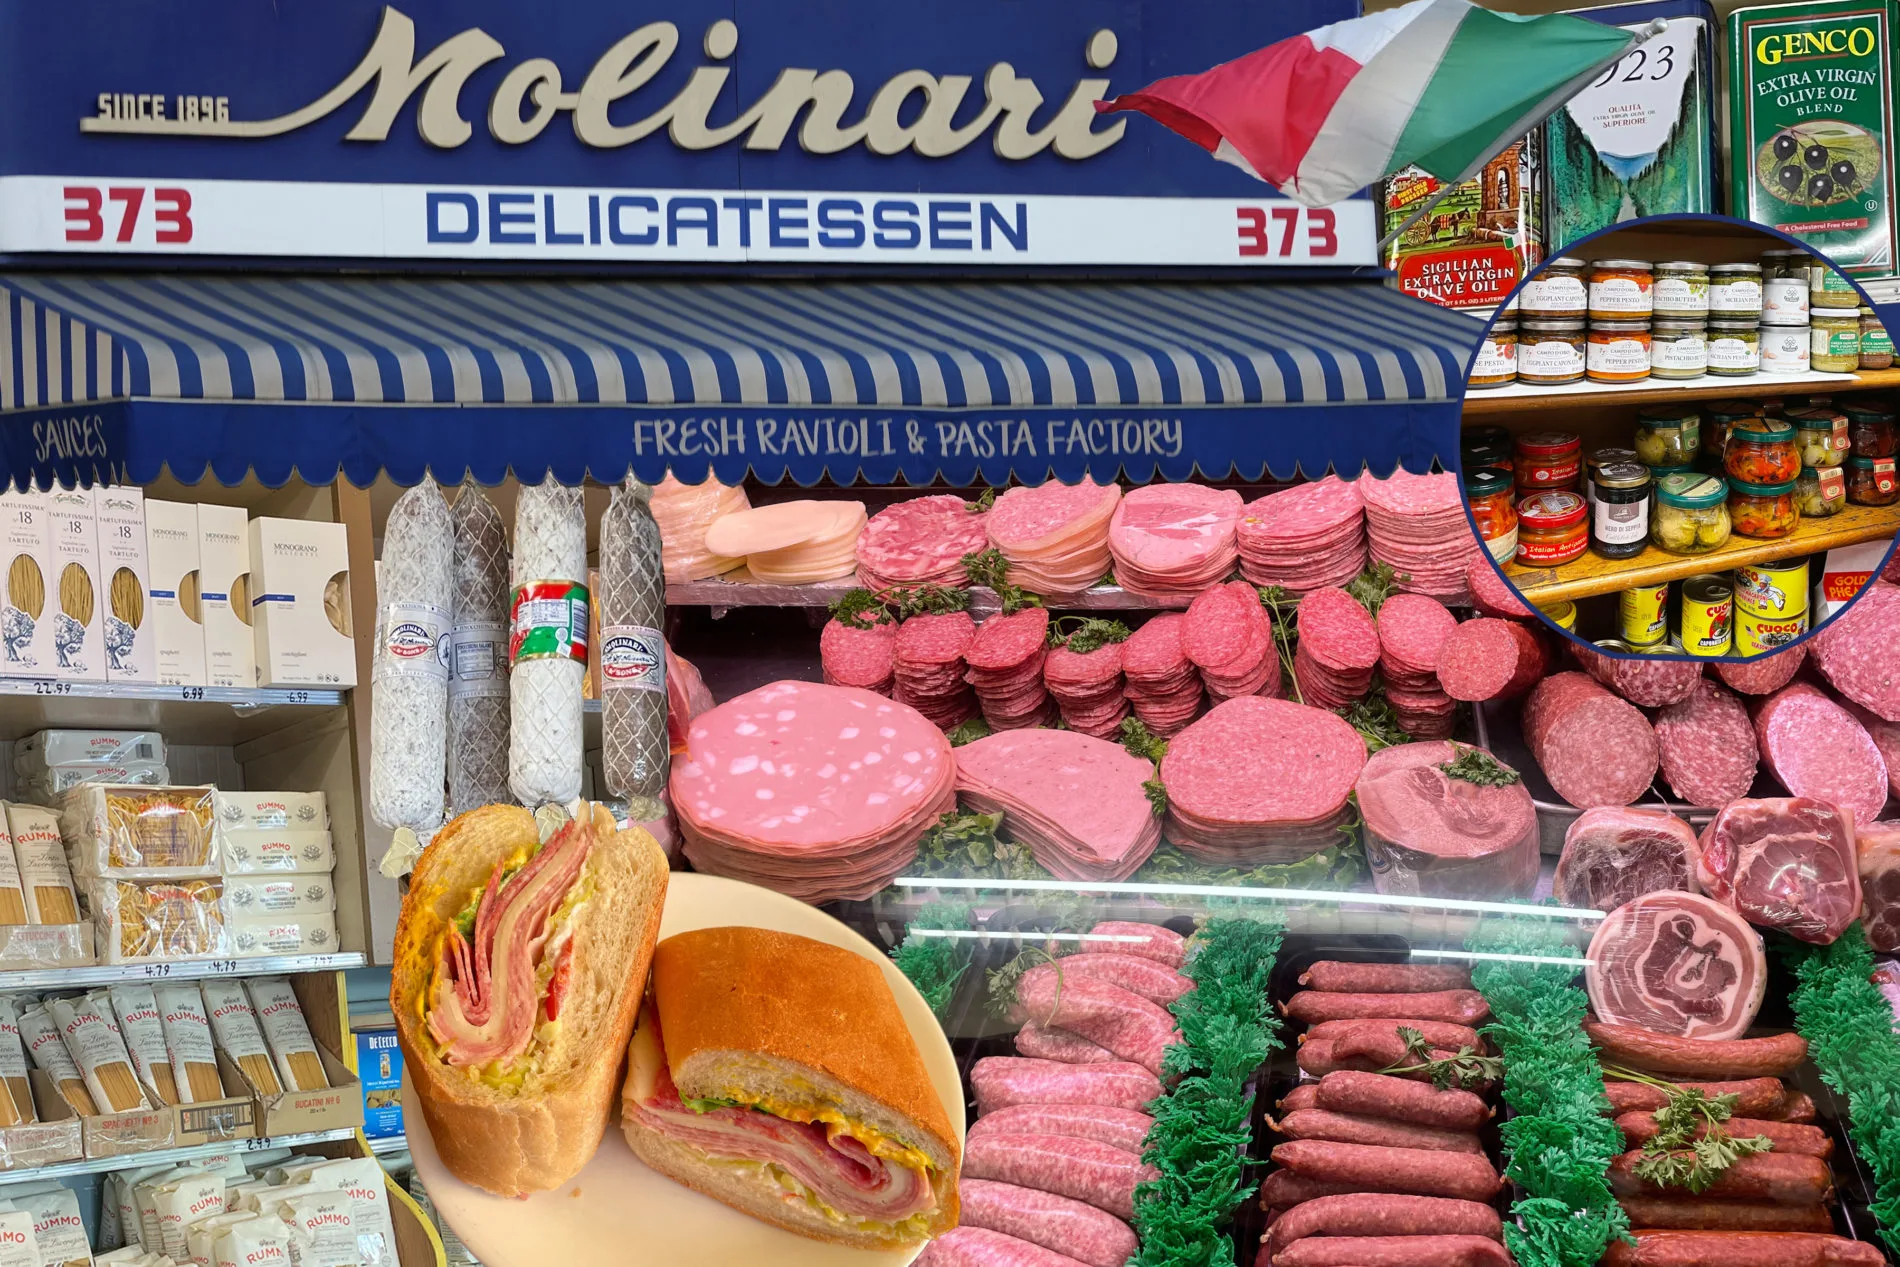 Molinari Delicatessen in North Beach, San Francisco. This hugely popular deli has been making great sandwiches since 1896.